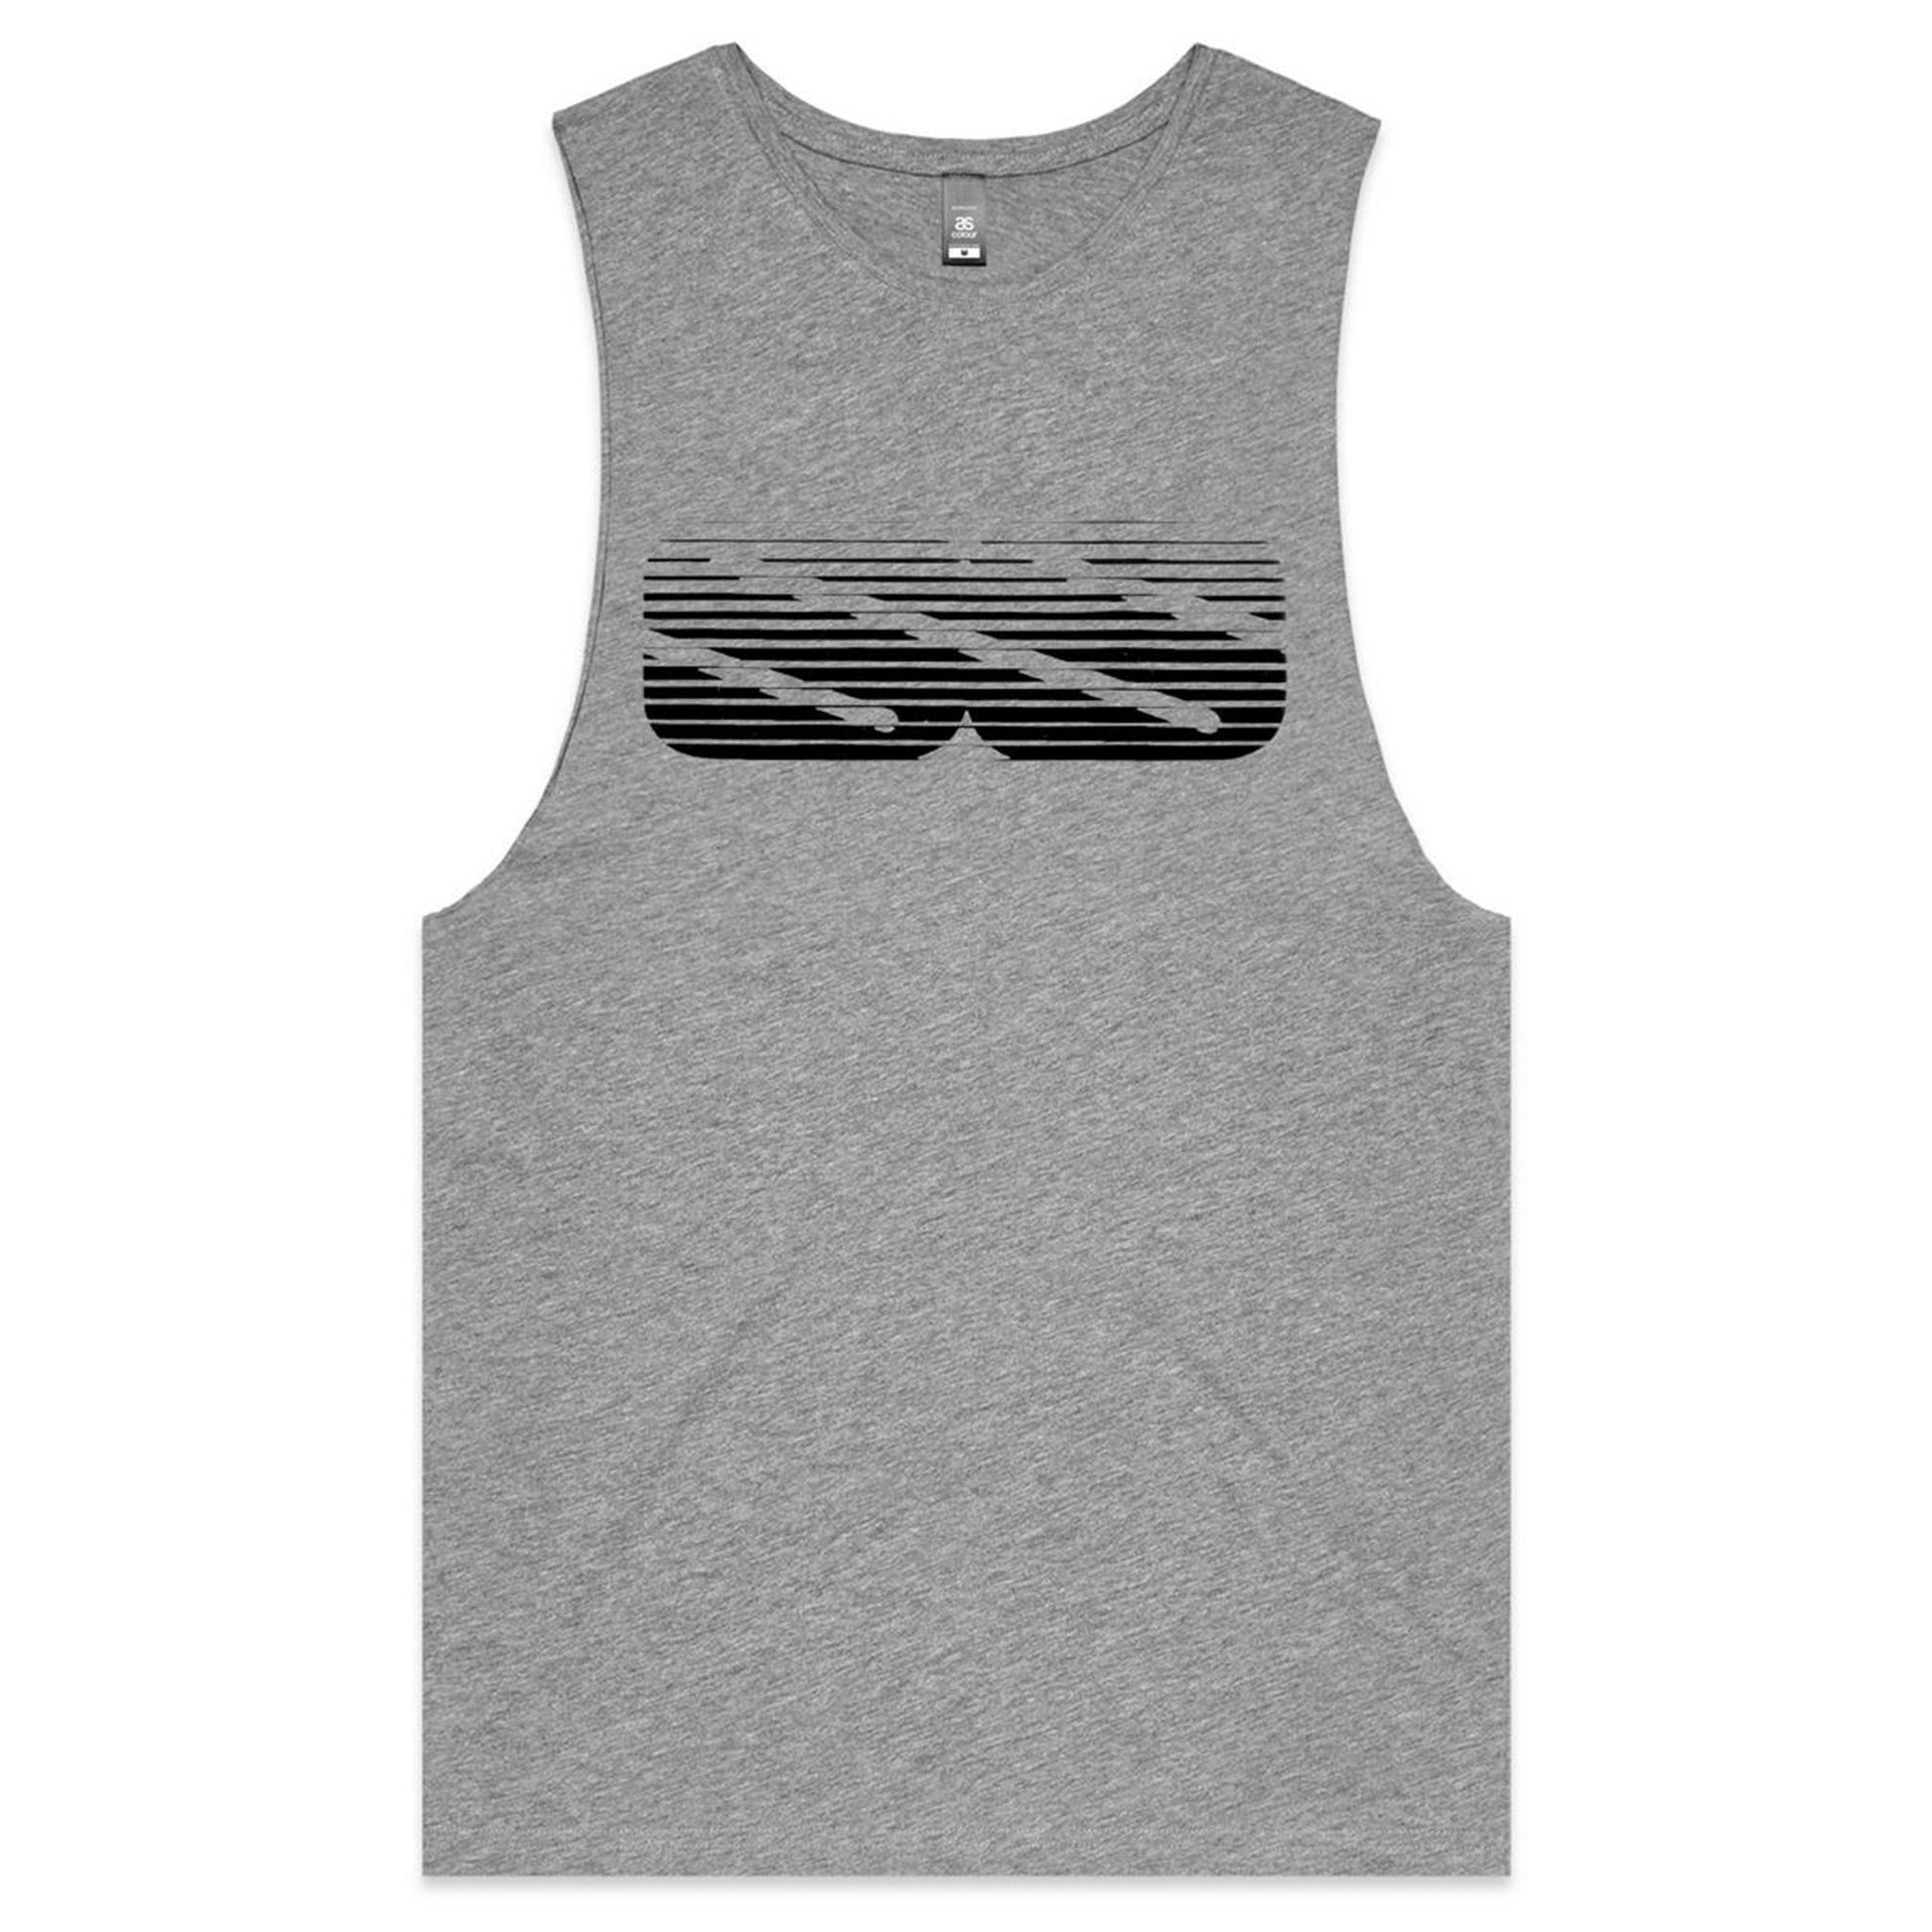 Holden Commodore VK SS Decal - Mens Tank Top Tee - Shed Shirts